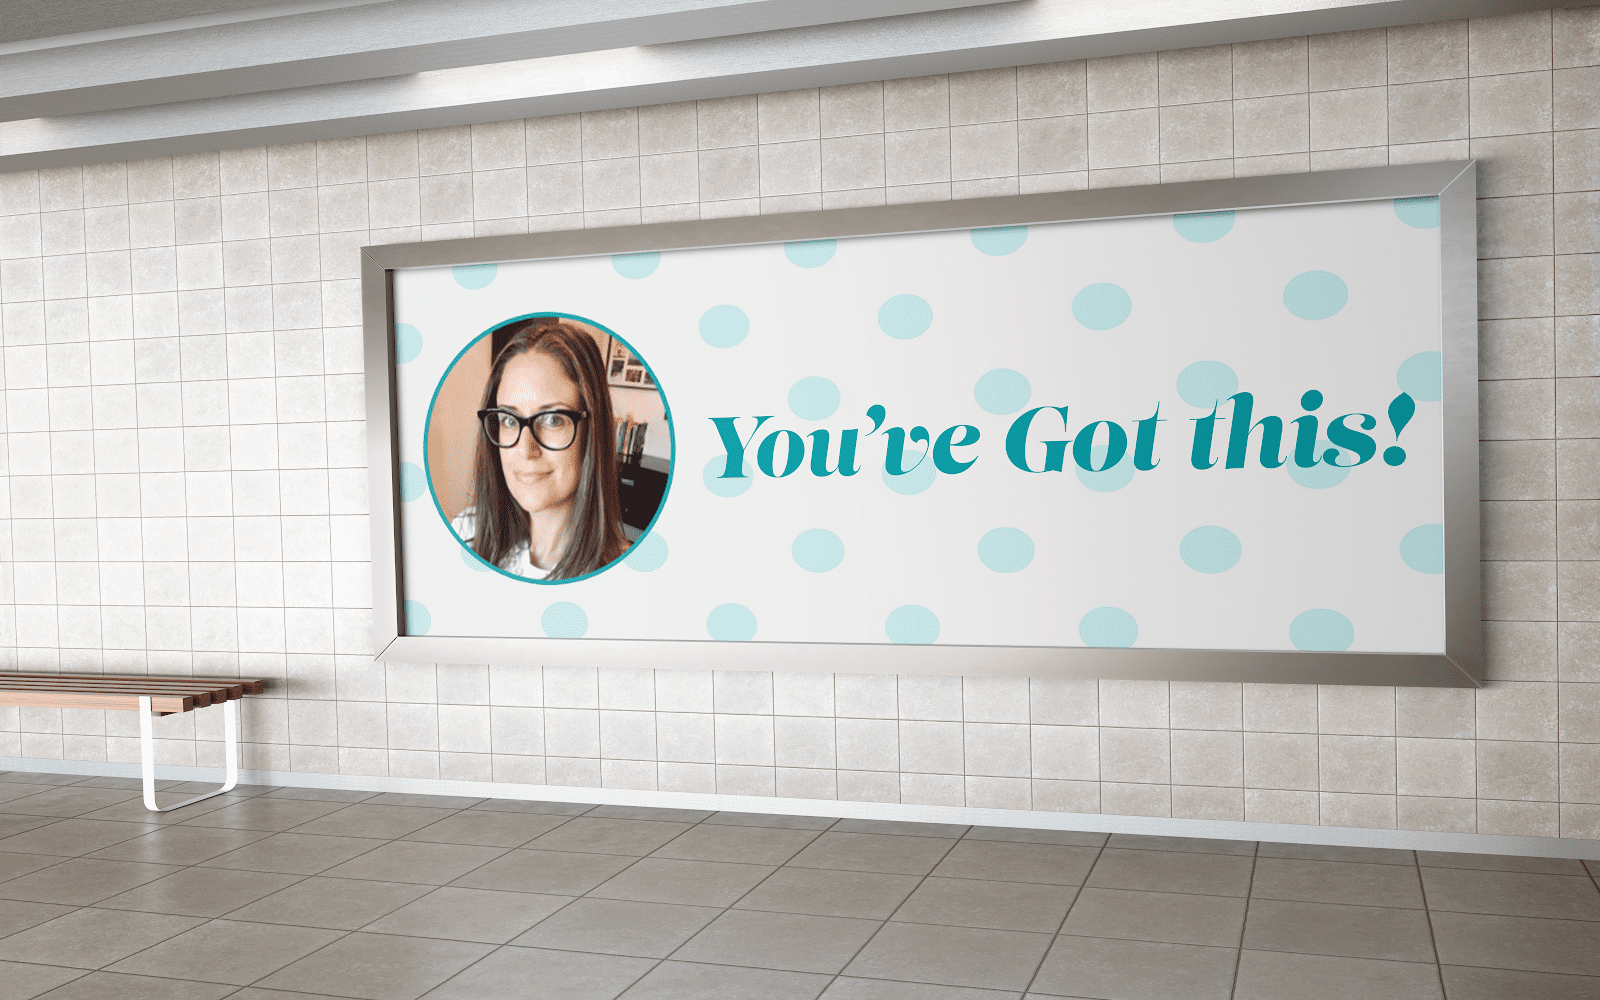 A billboard with a photo of Jenn and the quote "You've got this."